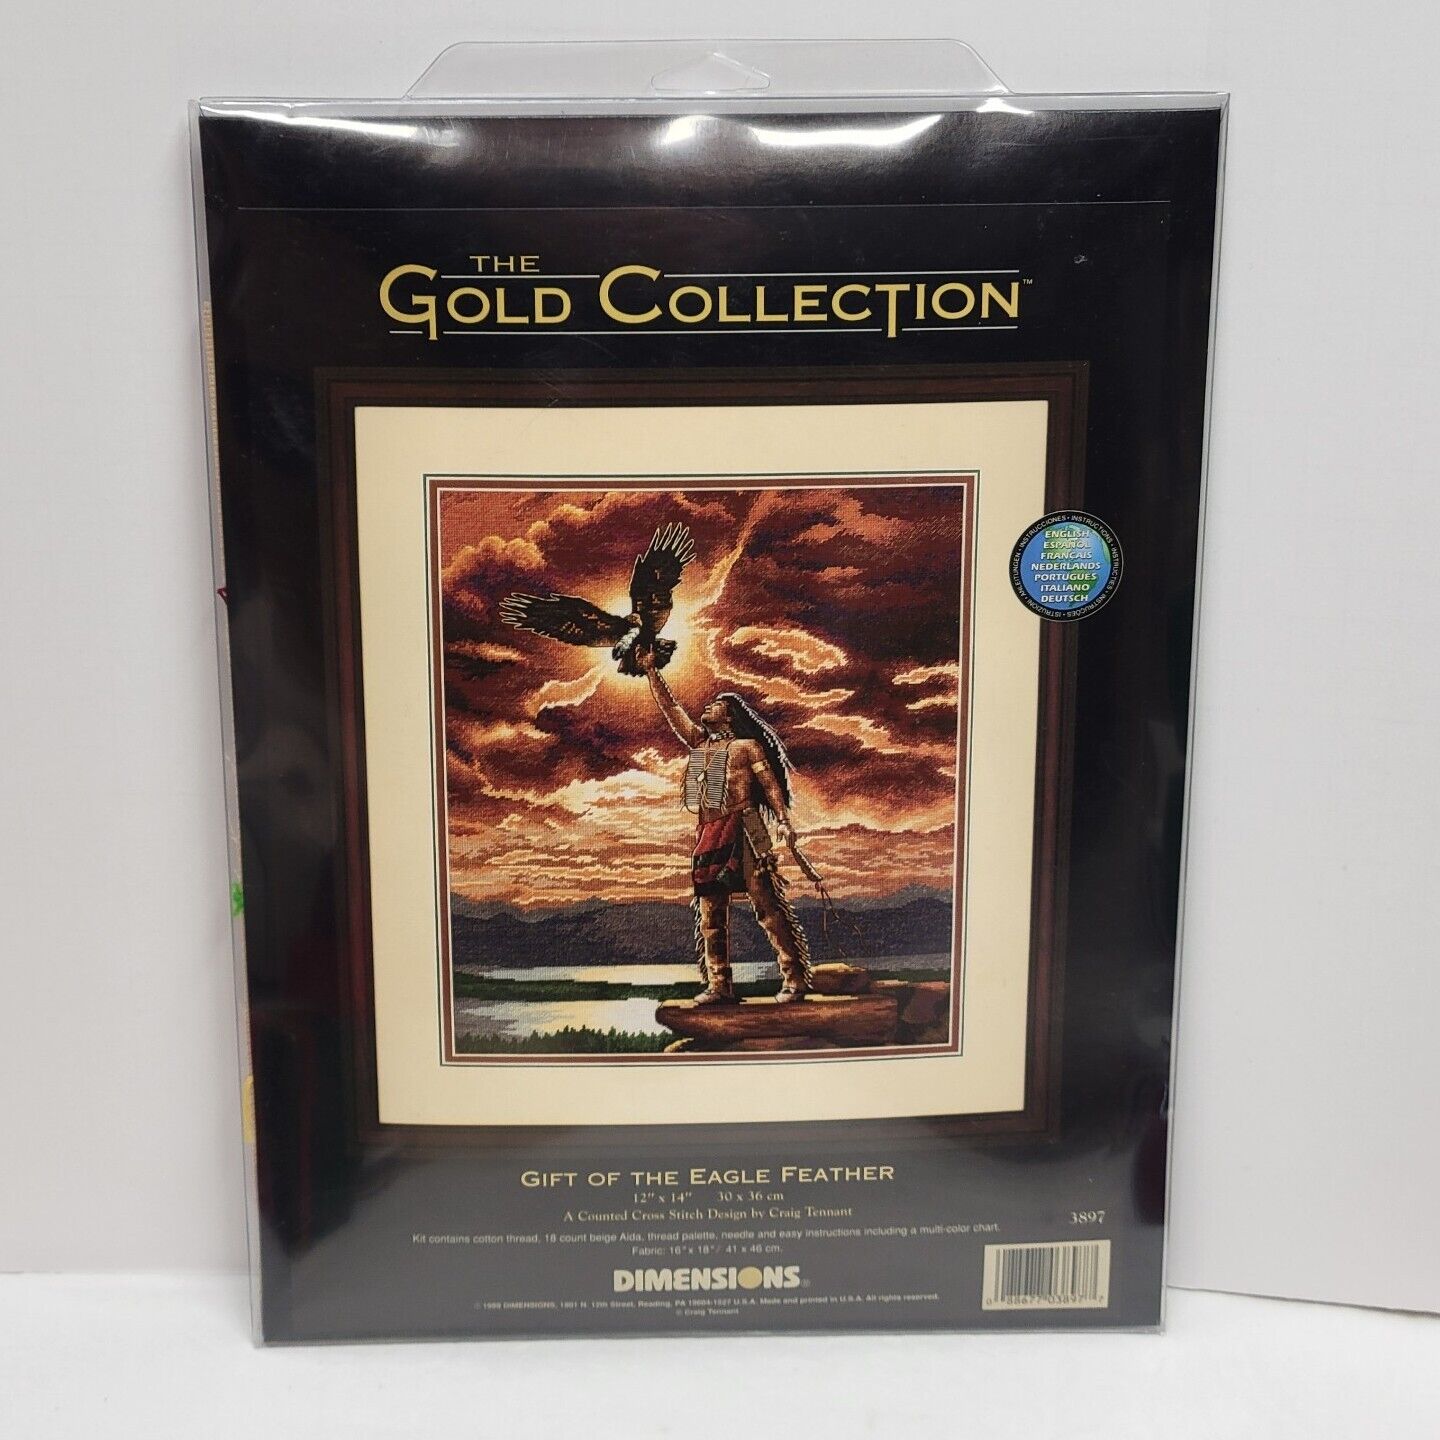 New Dimensions Gold Collection GIFT OF THE EAGLE FEATHER Cross Stitch Kit #3897